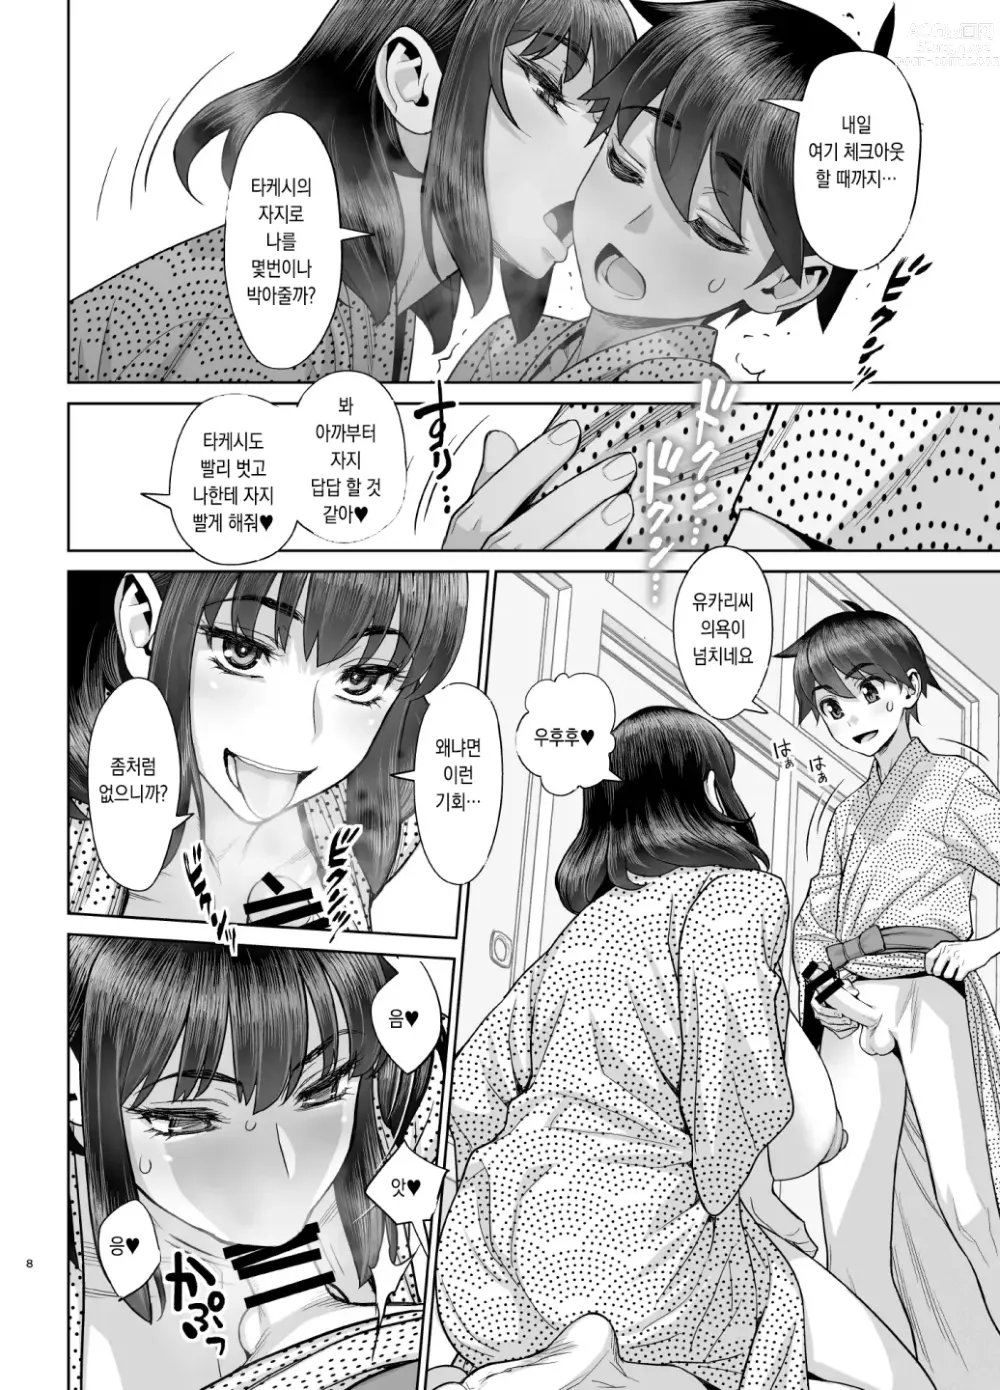 Page 8 of doujinshi 첫숙박 섹스